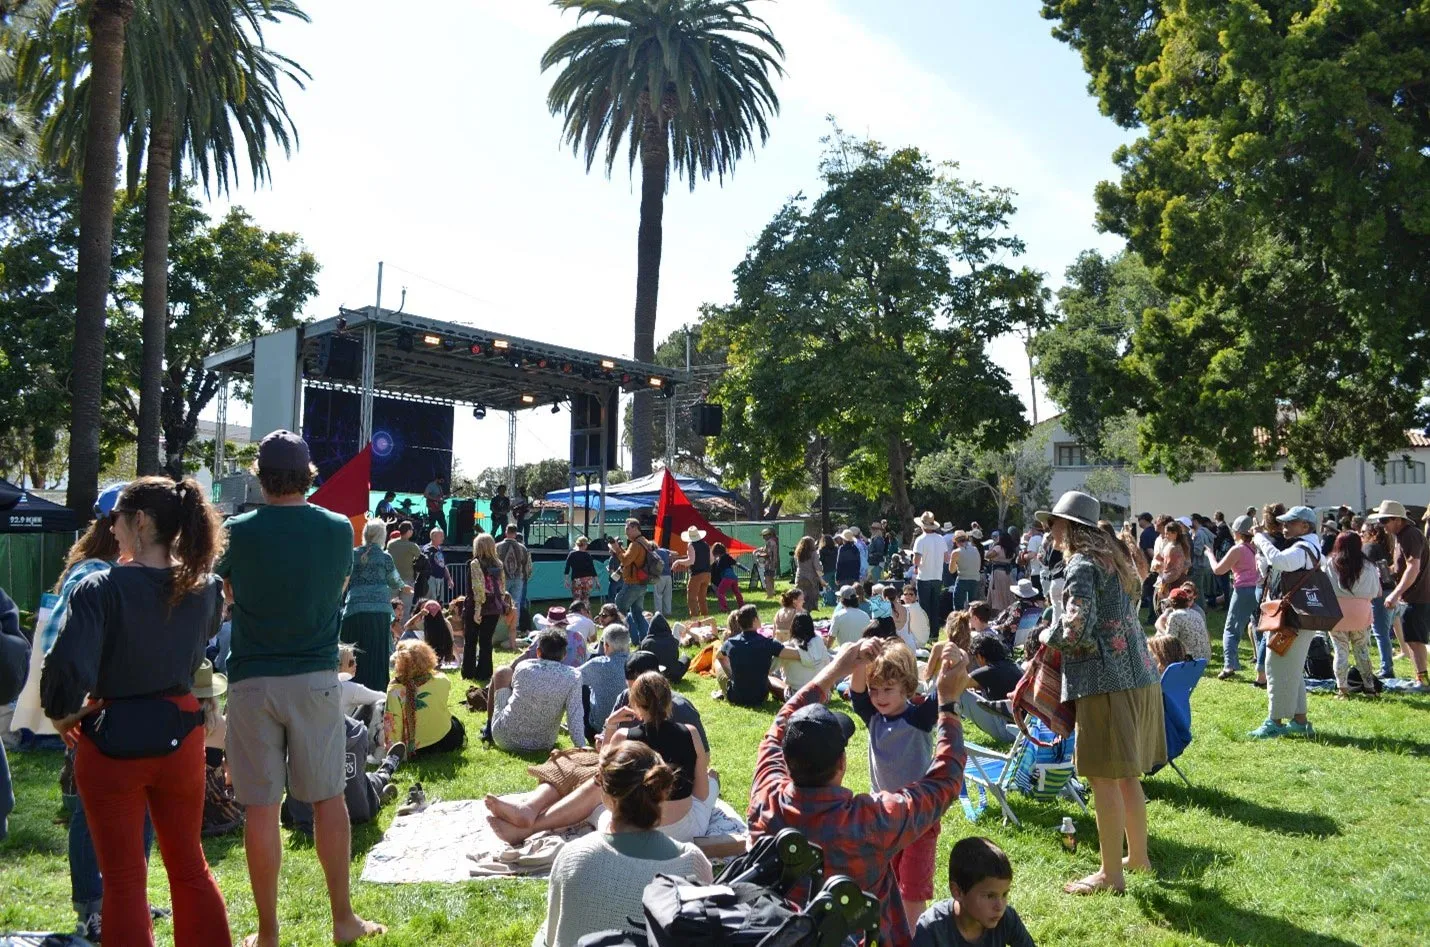 Earth Day Festival Celebrates Environmental Causes With Return to Alameda Park